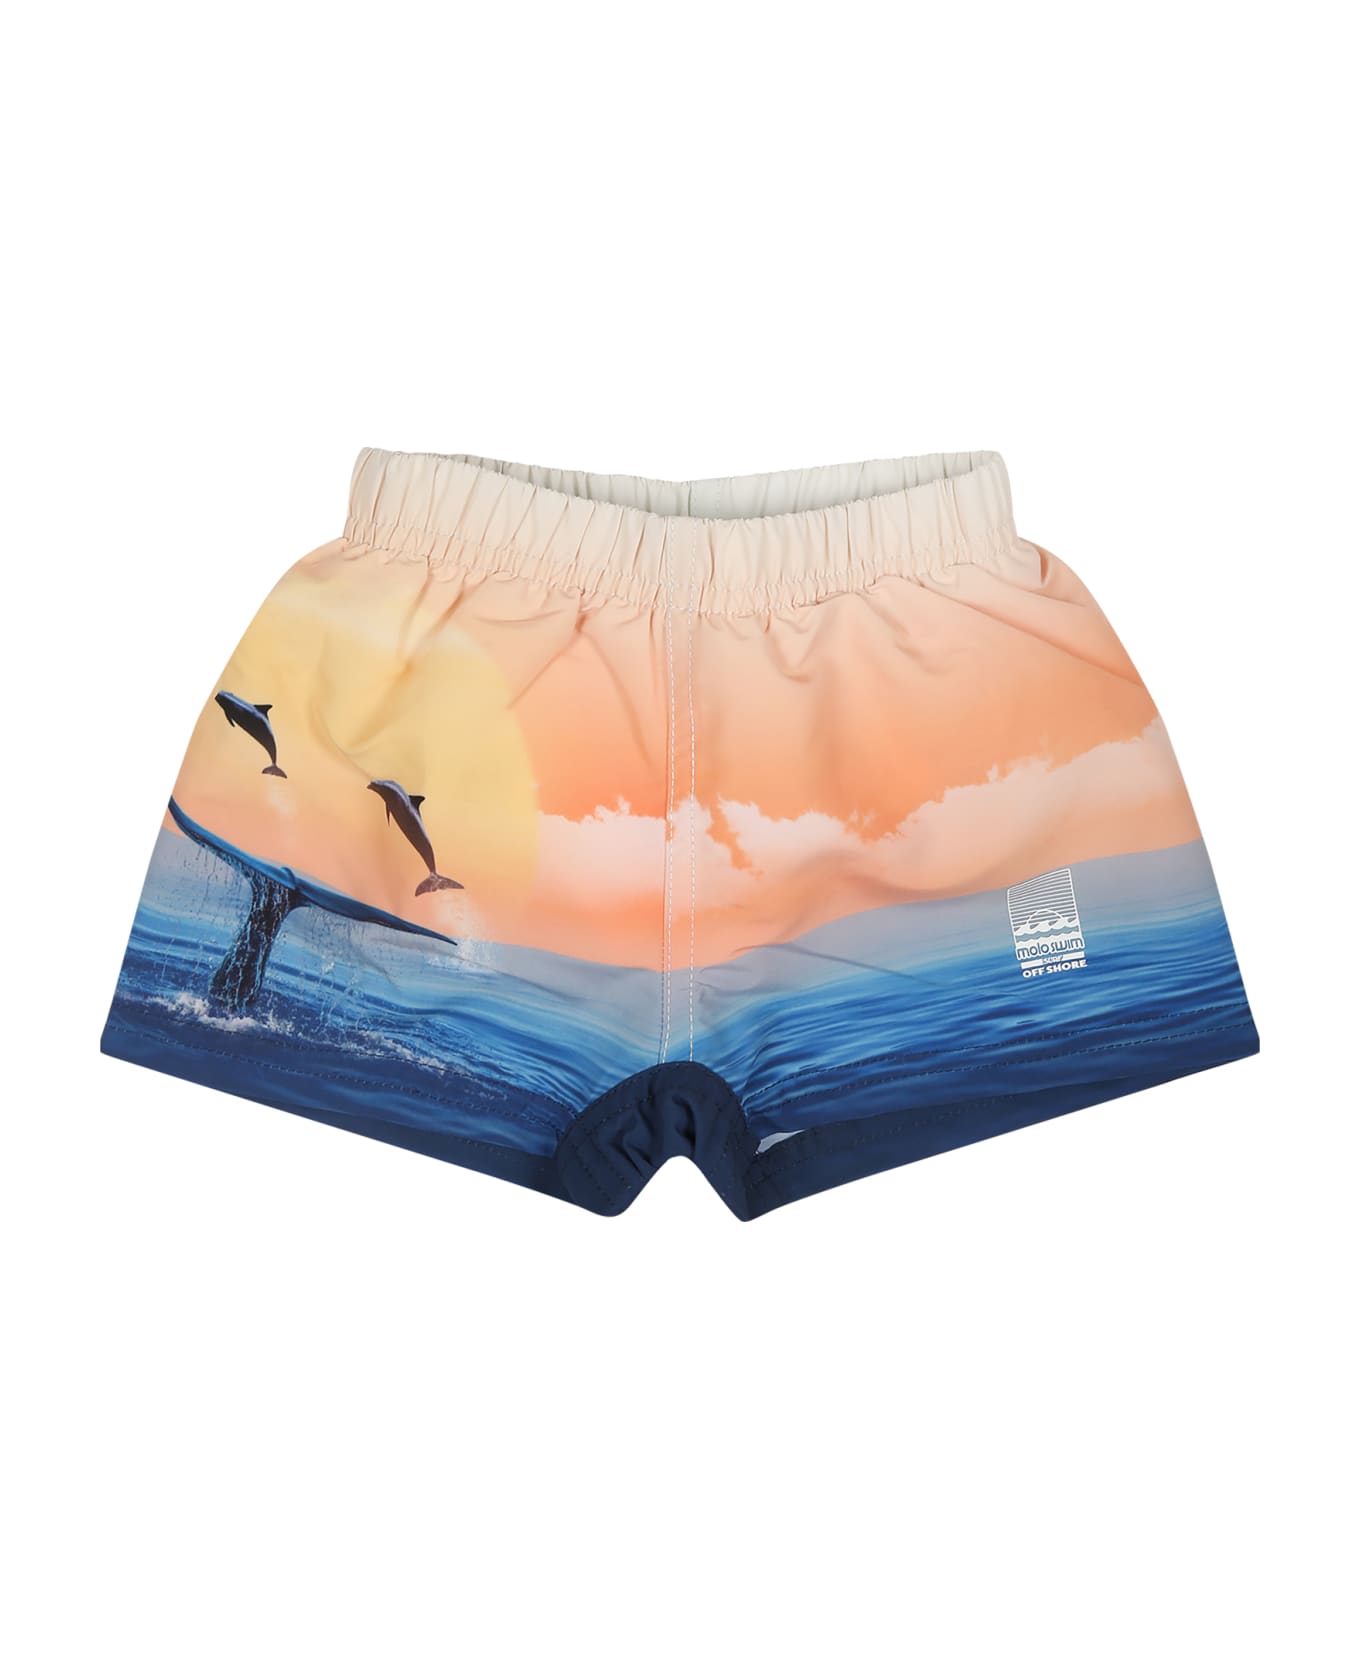 Molo Orange Swimsuit For Baby Boy With Dolphins - Multicolor 水着